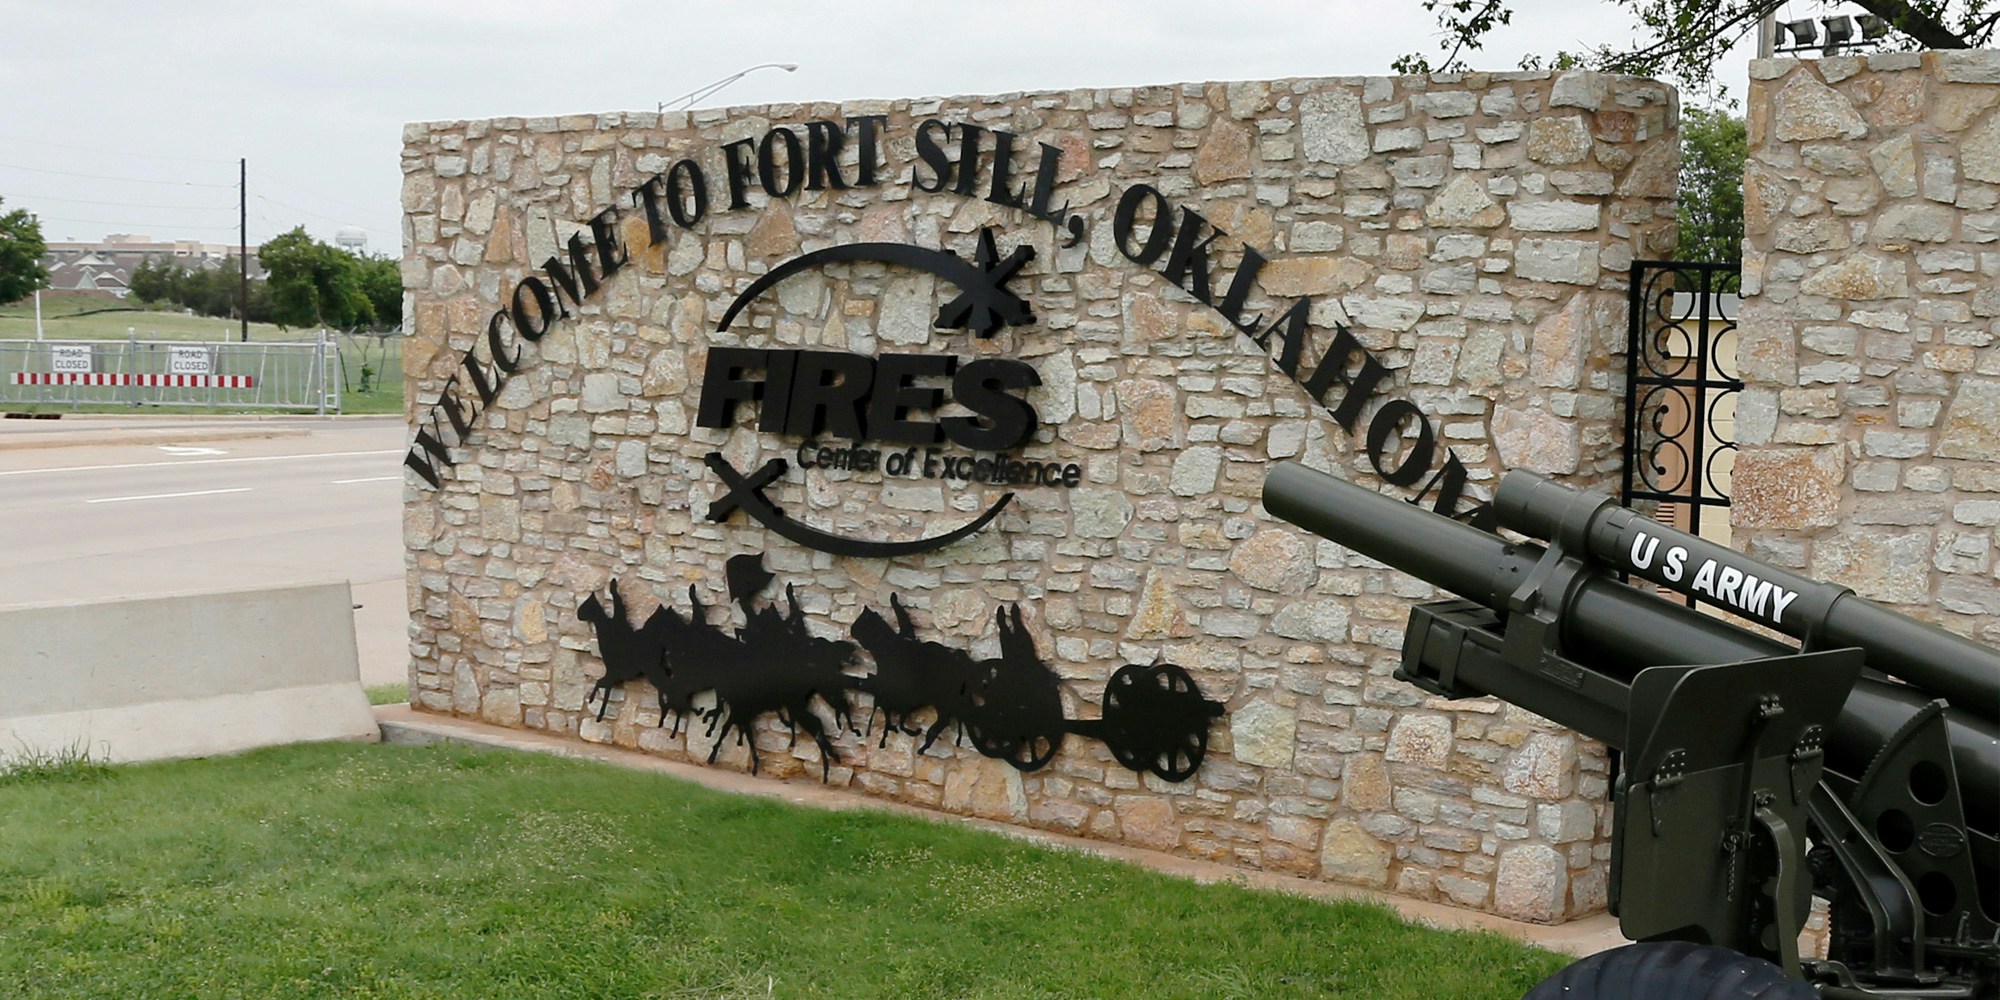 Main news thread - conflicts, terrorism, crisis from around the globe - Page 5 Fort-sill-oklahoma